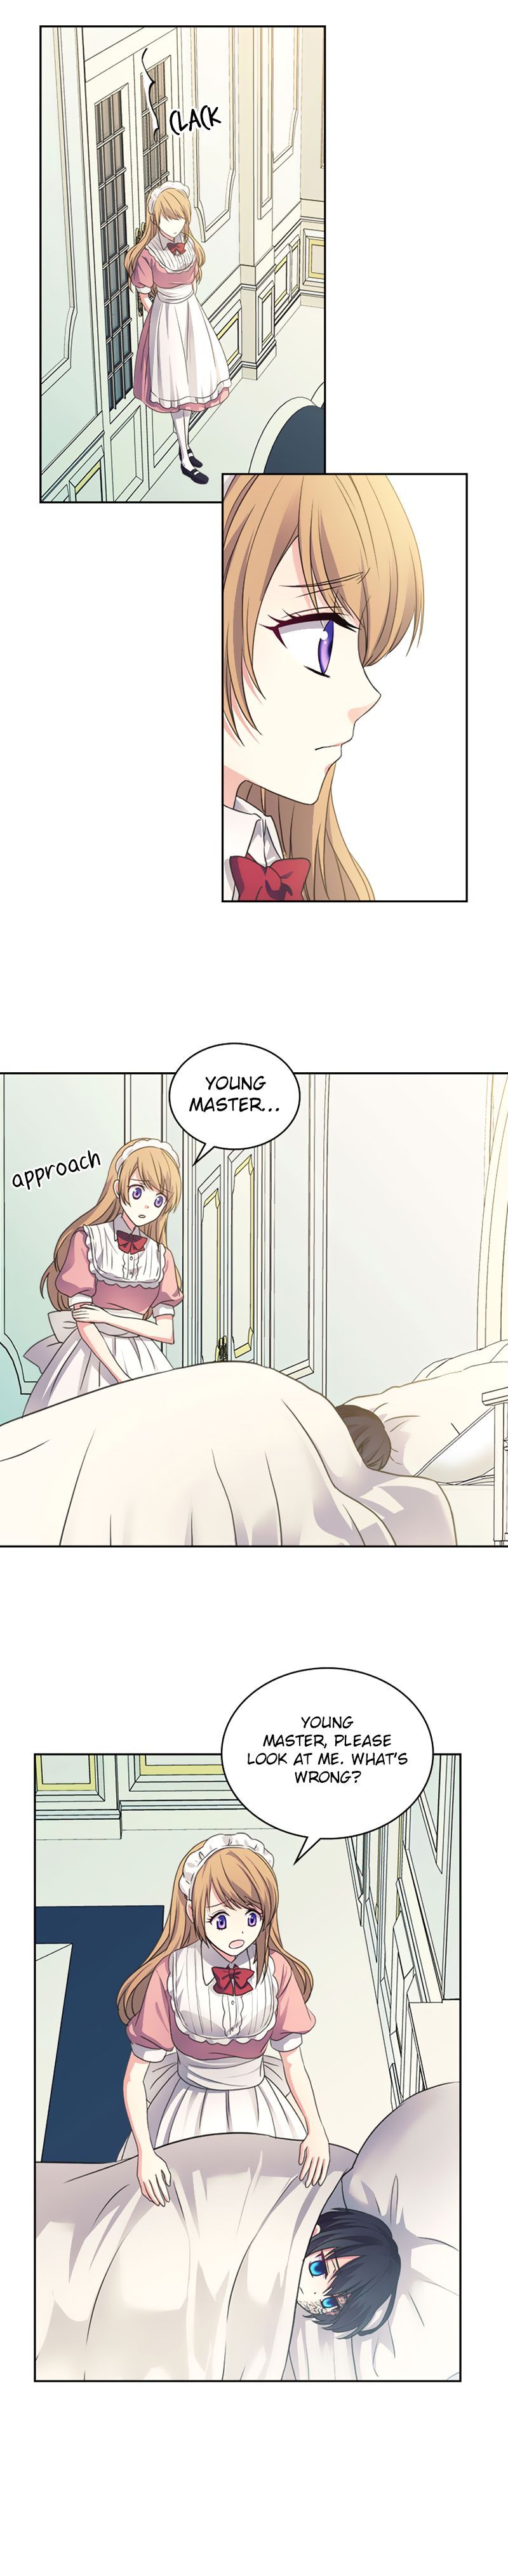 Sincerely: I Became a Duke's Maid Chapter 12 page 13